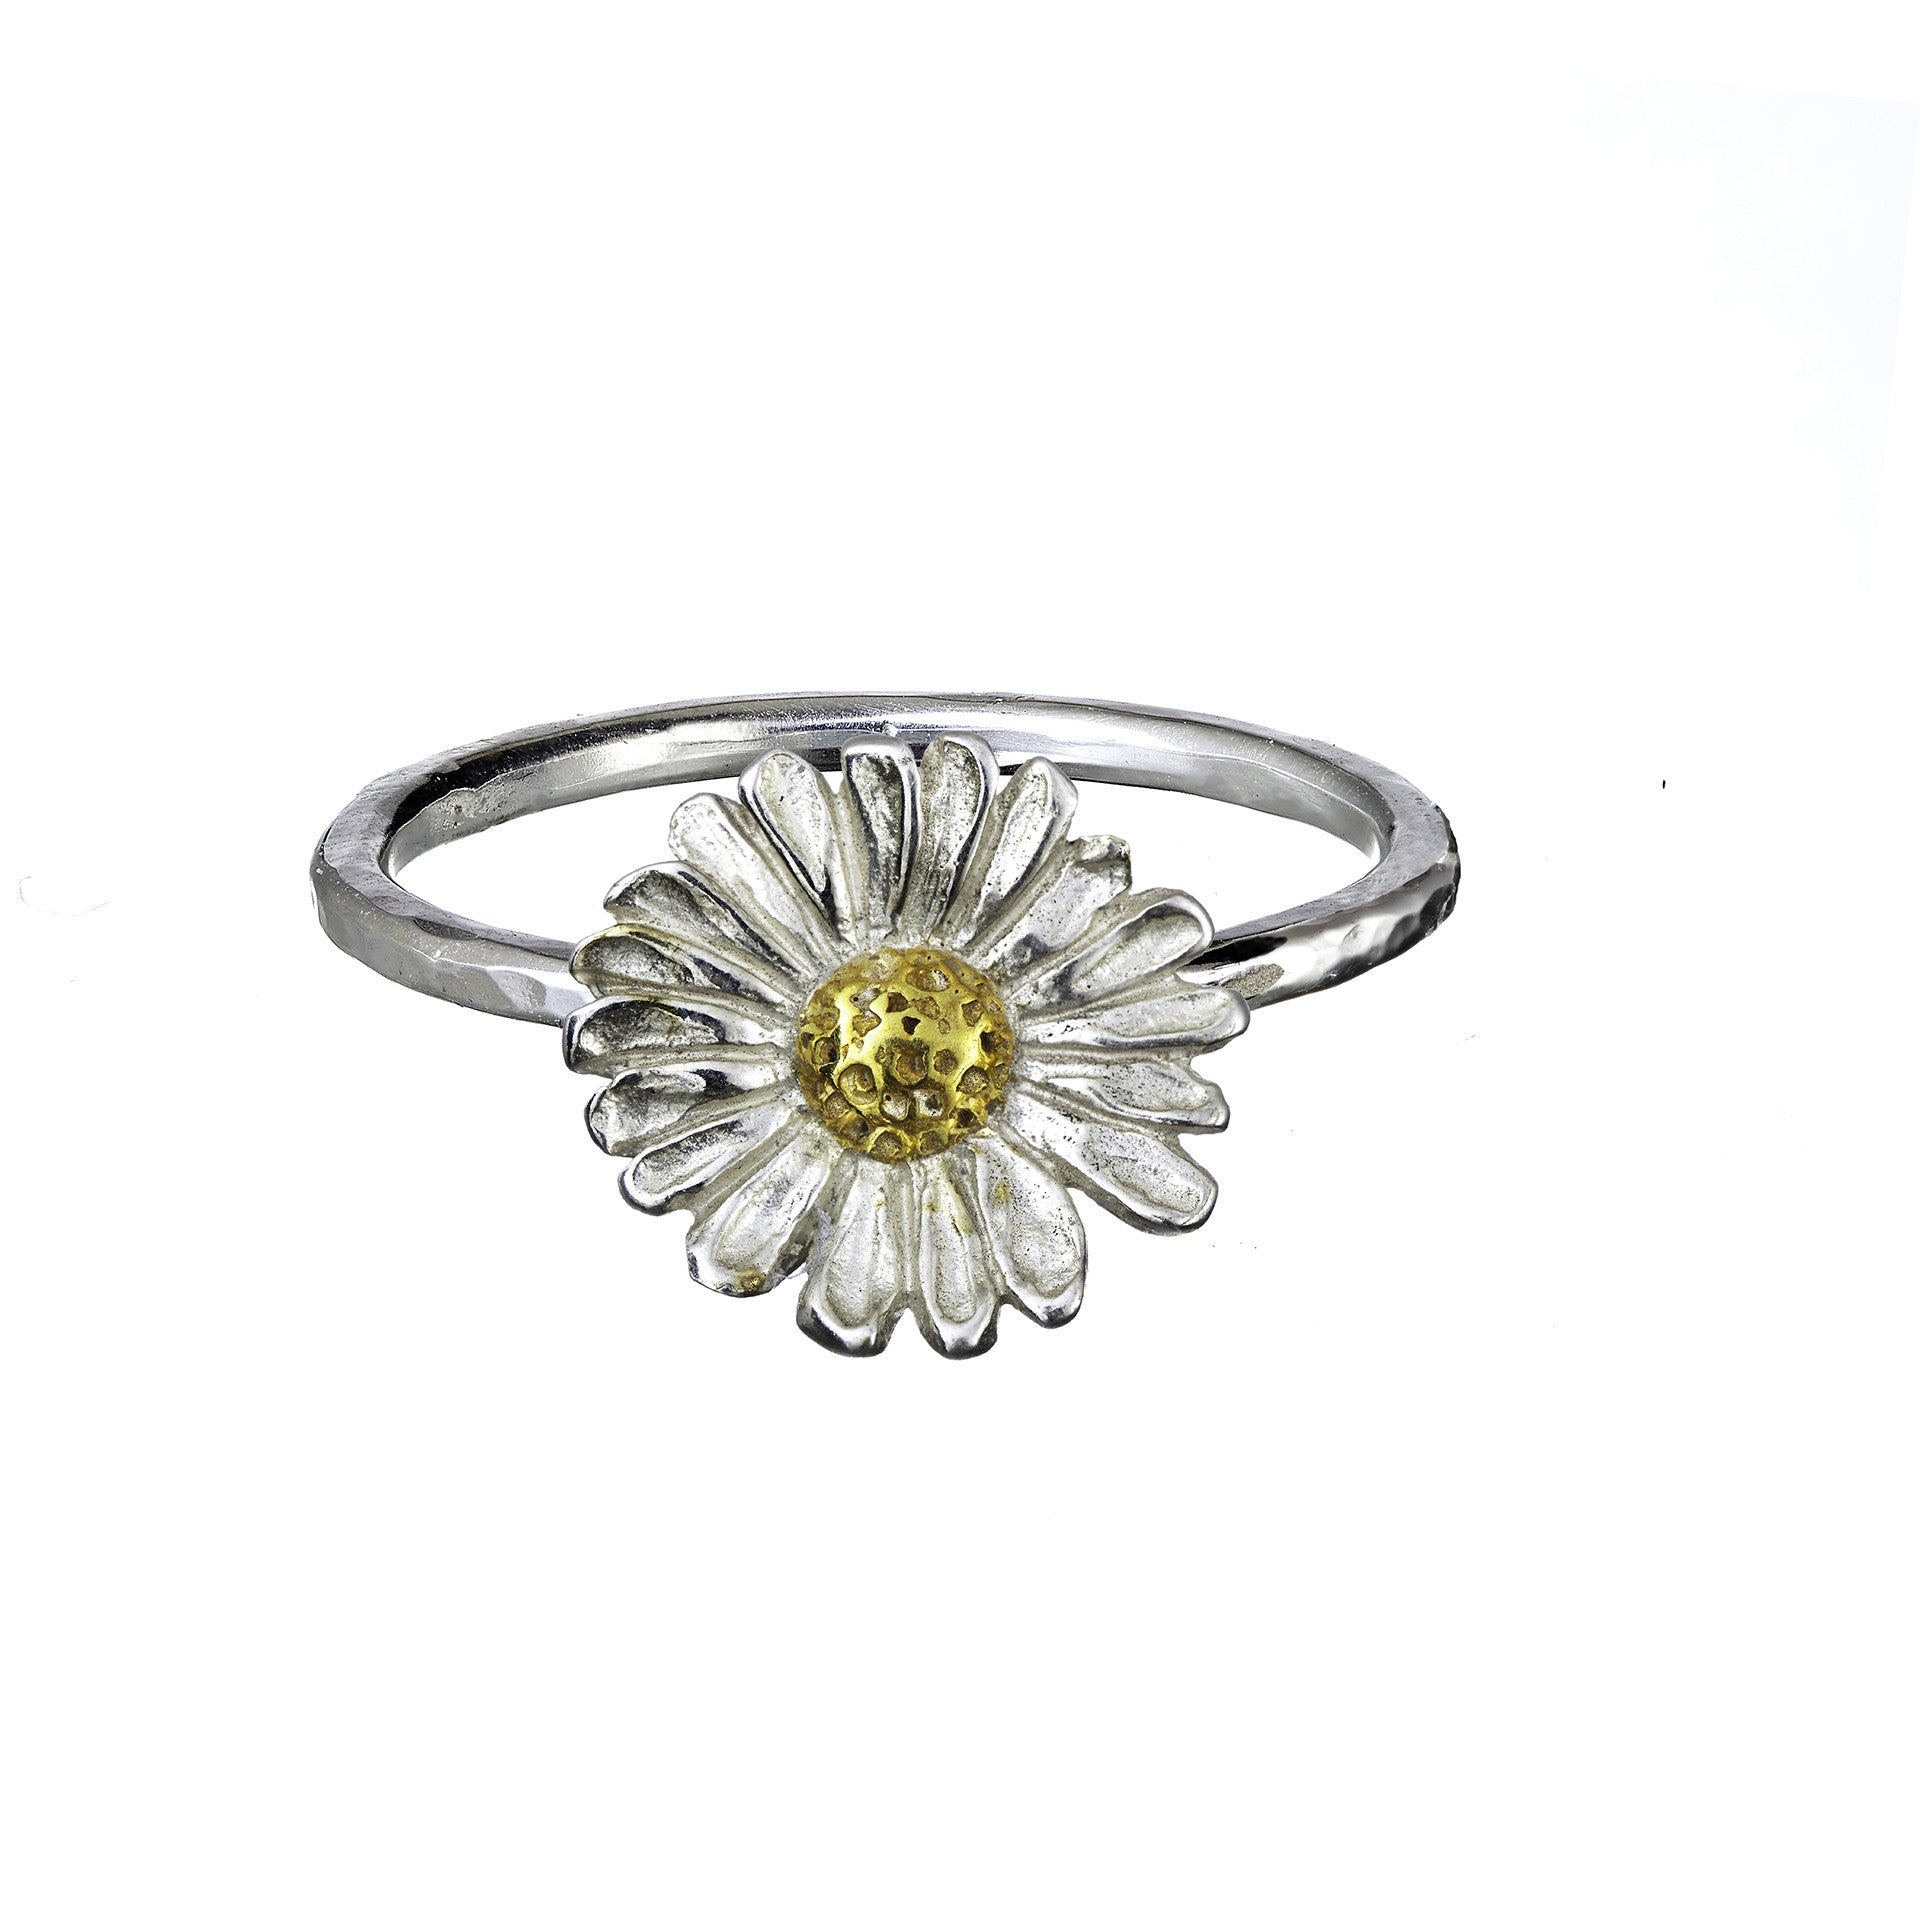 Sterling silver daisy ring with gold centre. Daisy jewellery piece handmade in Ireland.